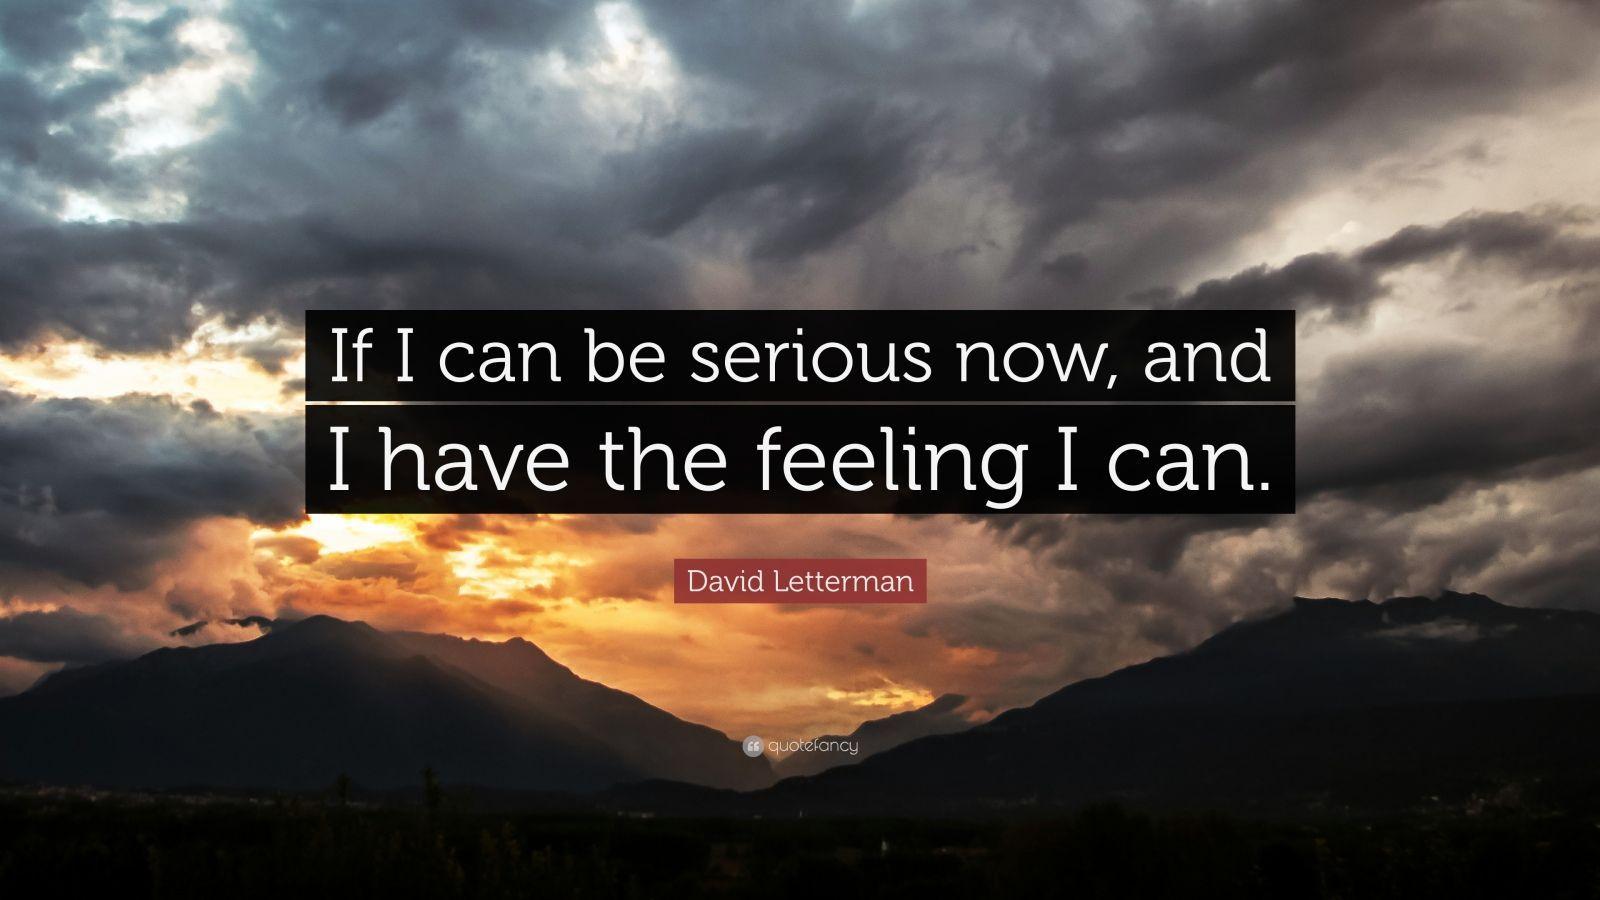 David Letterman Quote: “If I can be serious now, and I have